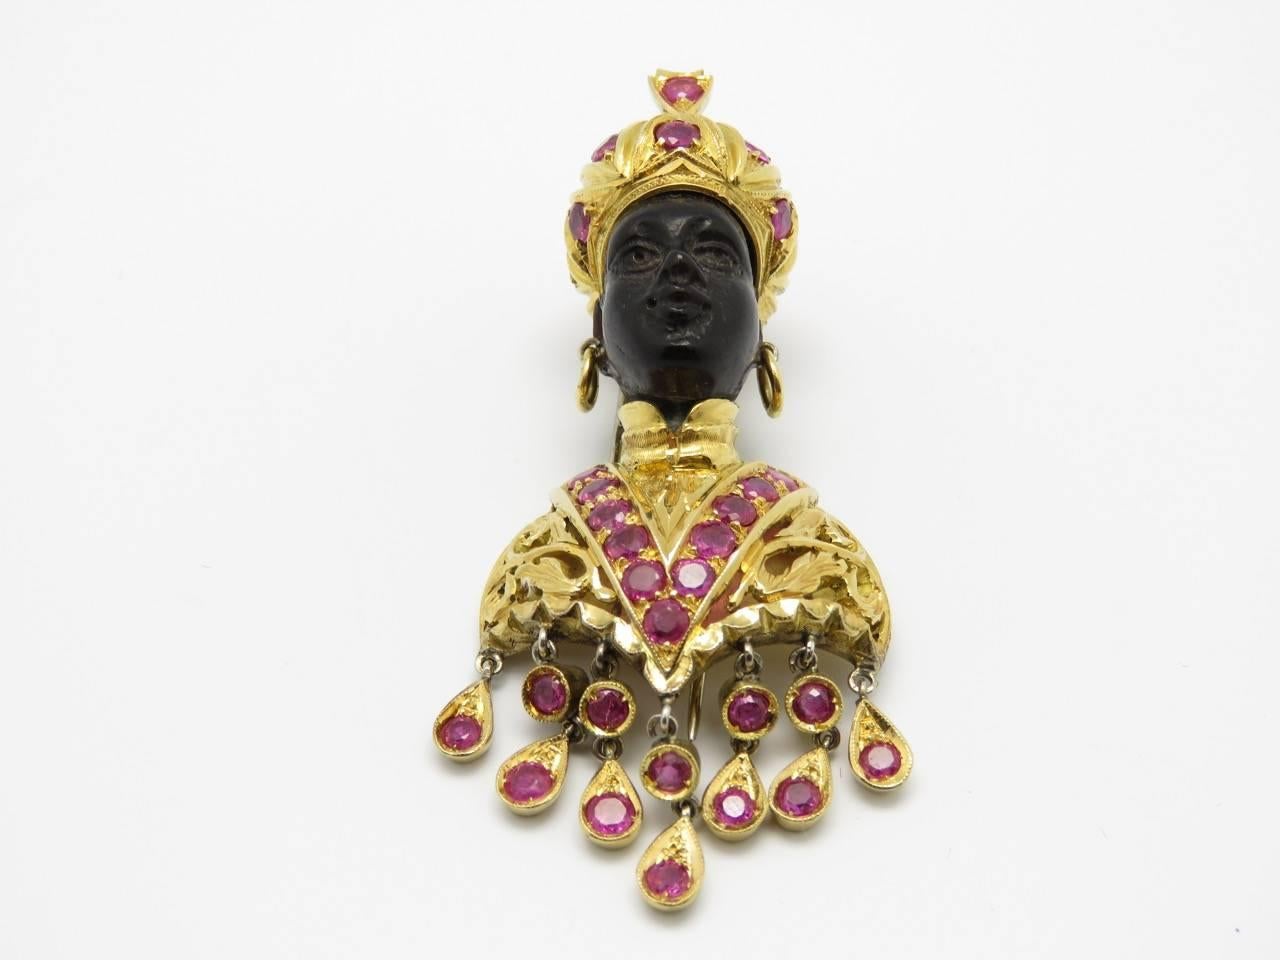 A Black Amber,Ruby and 18k Yellow Gold Clip by L.Nardi
Circa 1960

Dimensions:
2.36 in H x 1.02 W

Weight: 25.70 grams